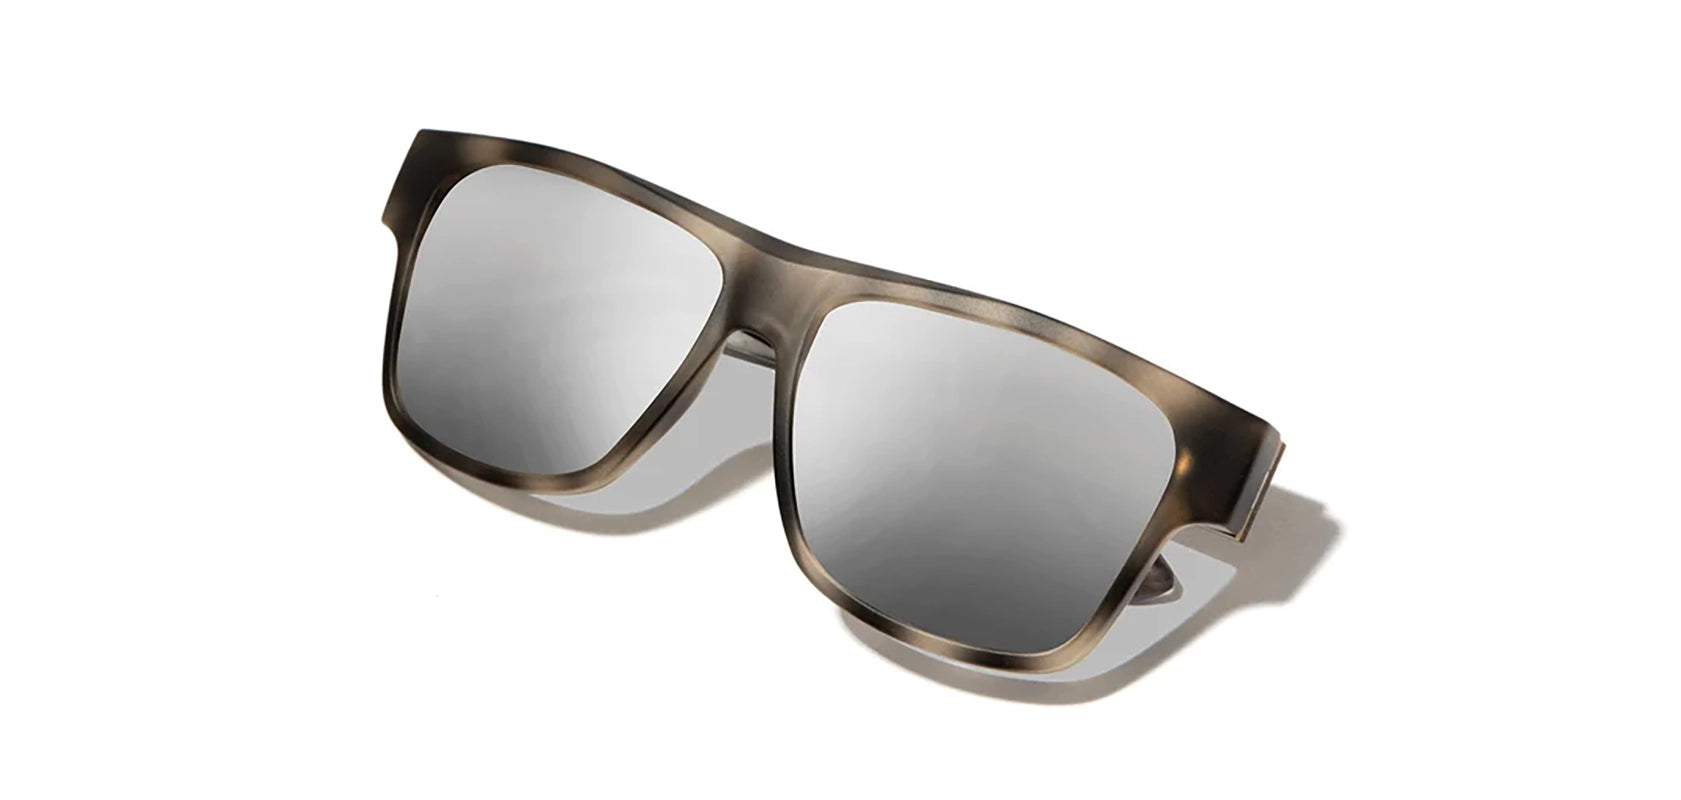 Shwood Camp- Cliff Sunglasses in Matte Grey Pearl / Walnut frames with Silver mirror polarized lenses, from angle closed view